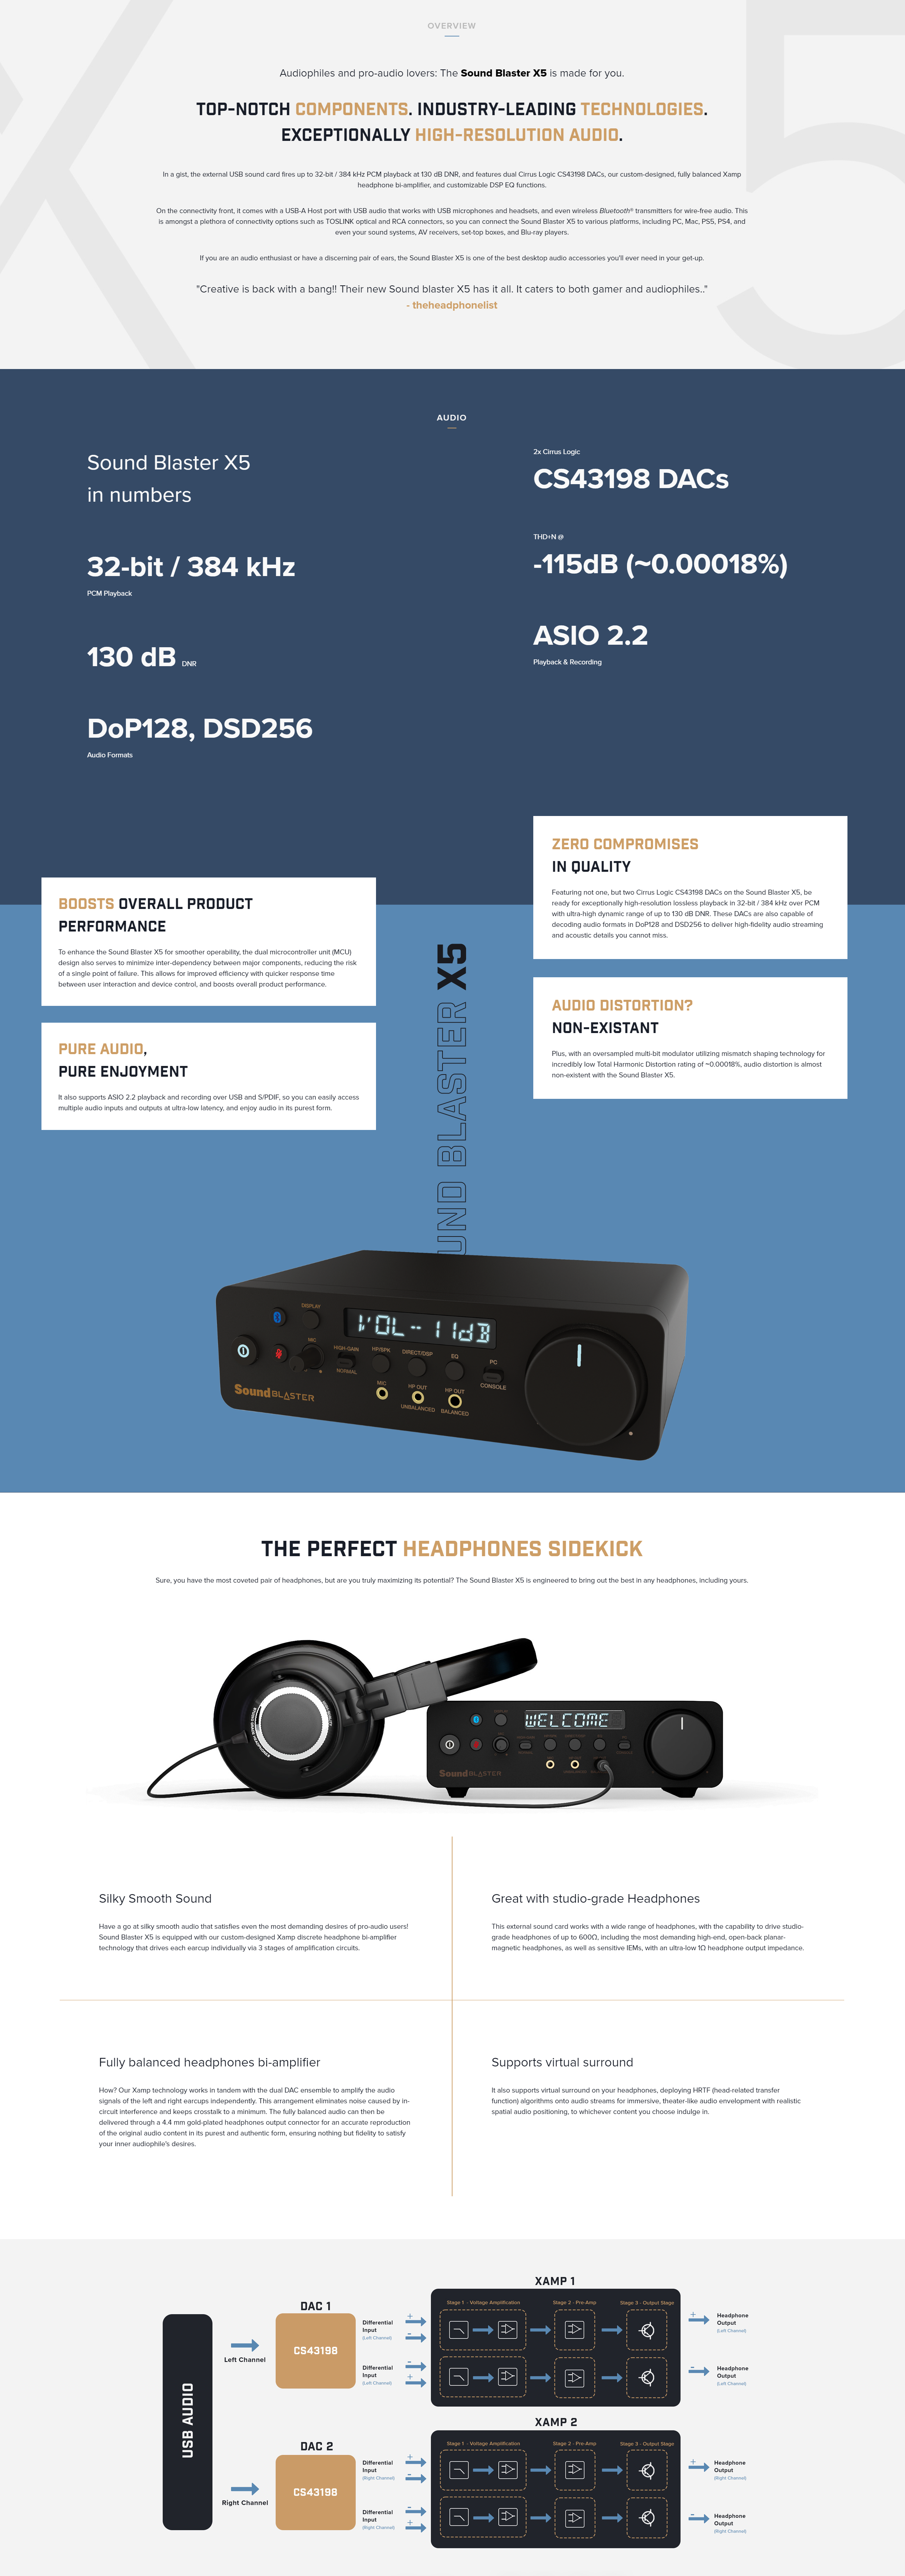 A large marketing image providing additional information about the product Creative Sound Blaster X5 Hi-Res External Dual DAC USB Sound Card - Additional alt info not provided